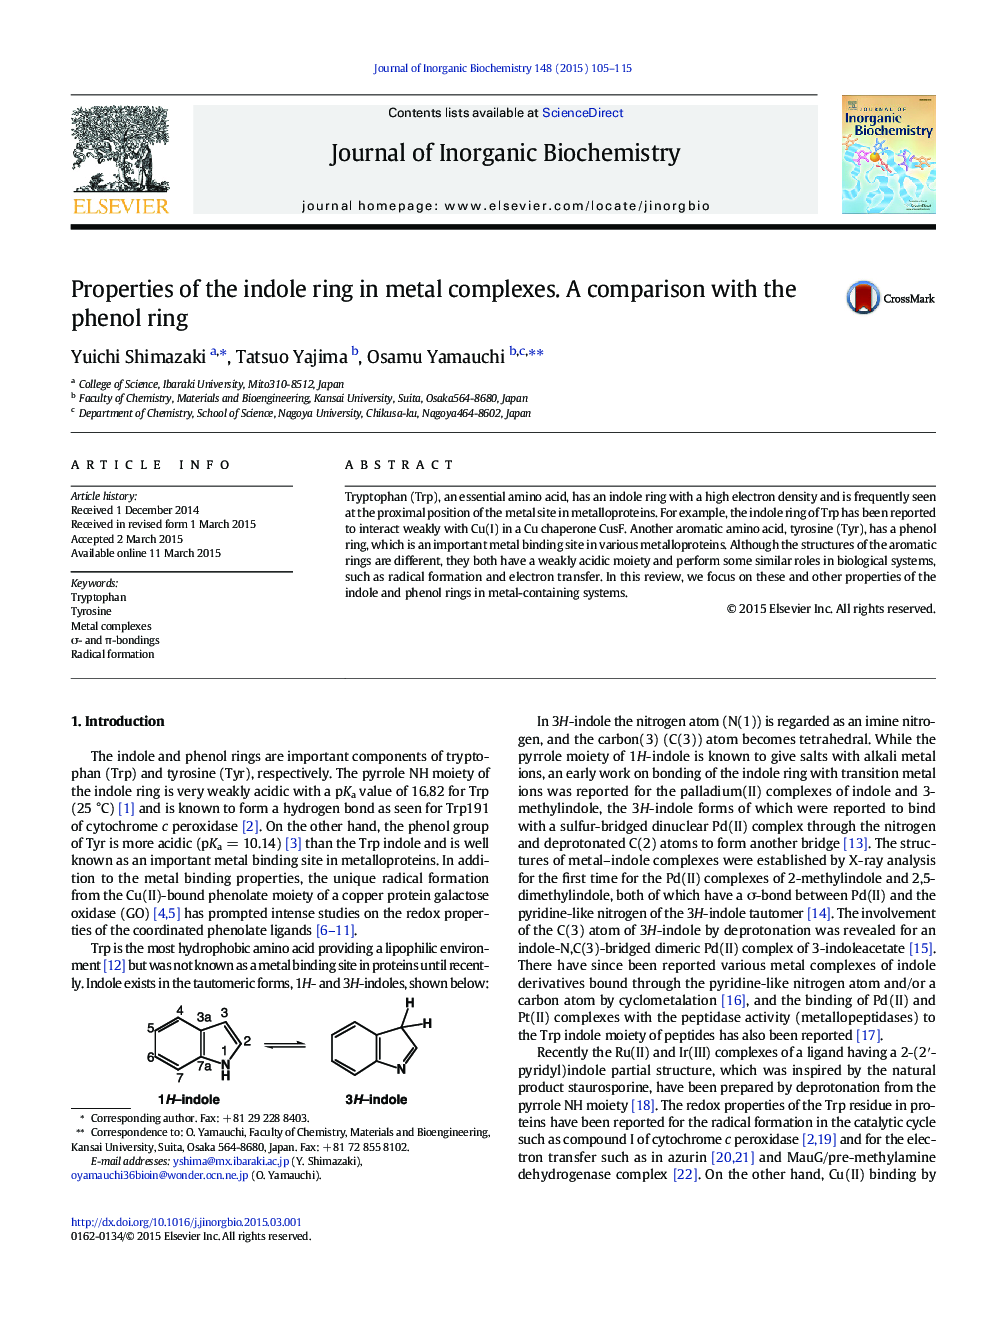 Properties of the indole ring in metal complexes. A comparison with the phenol ring